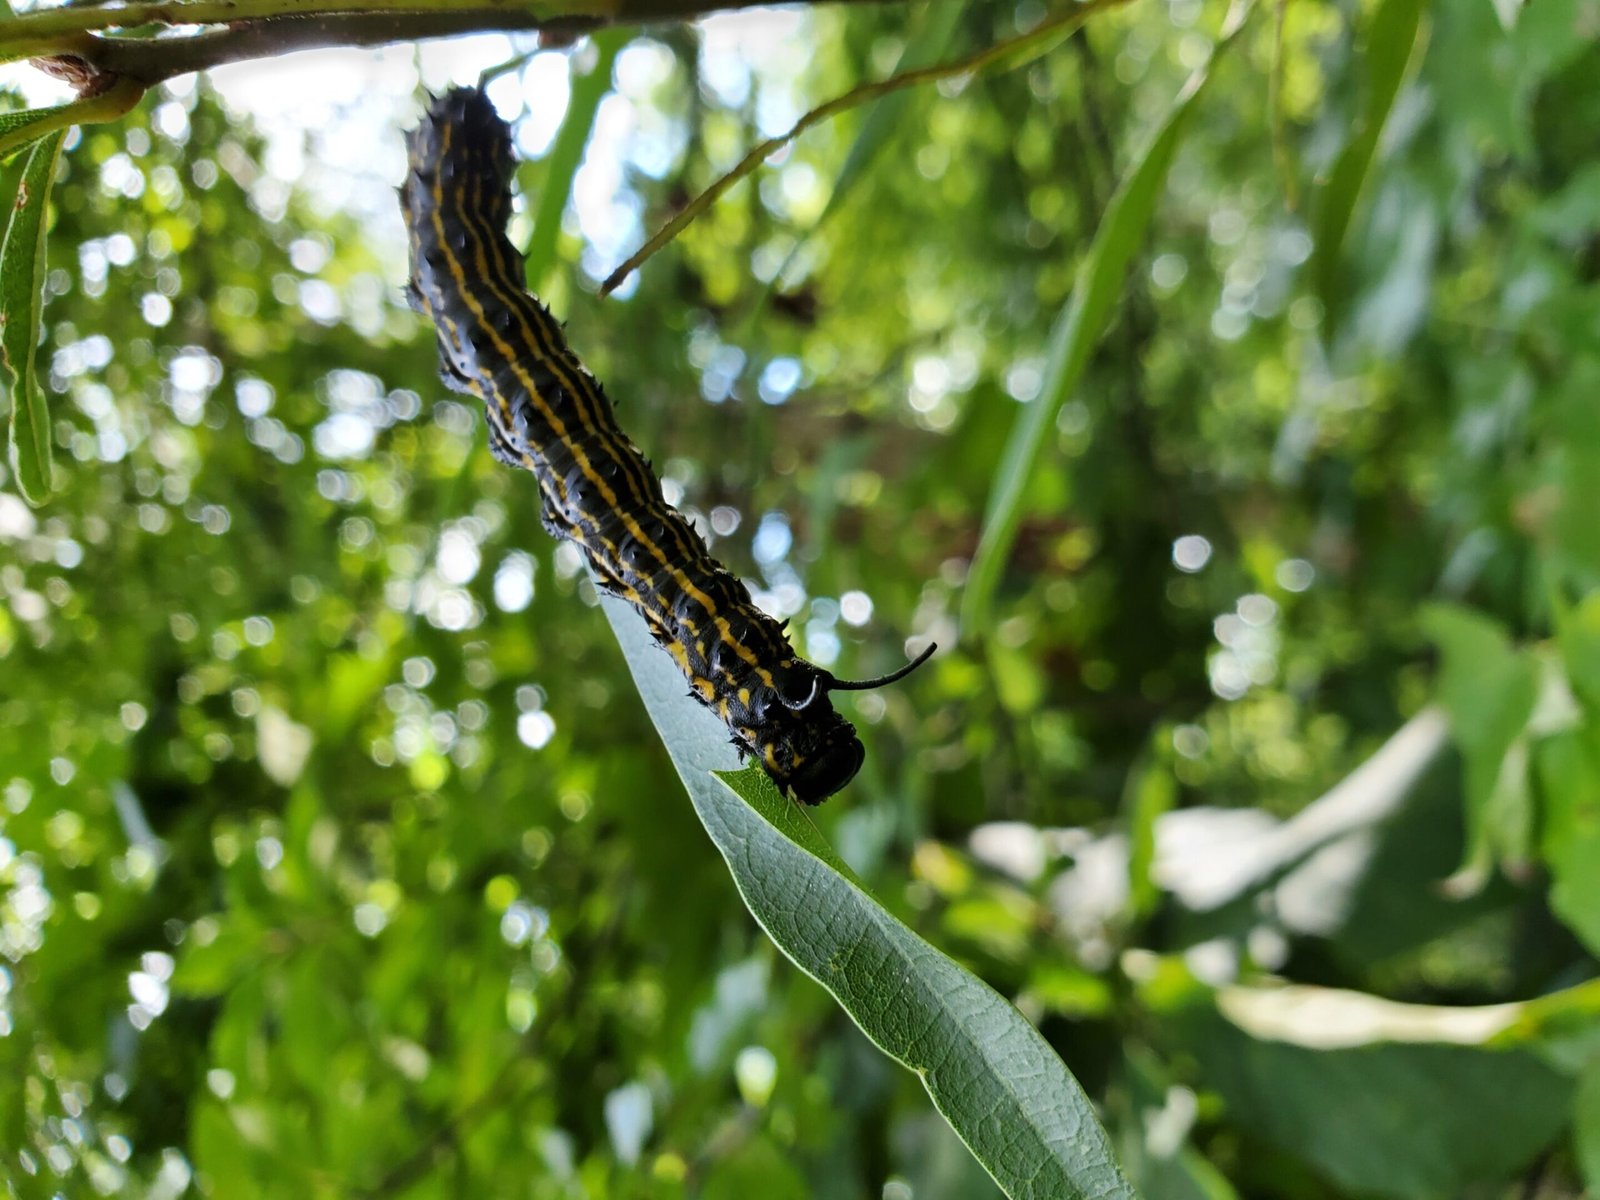 Scientists discover how caterpillars can stop their bleeding in seconds